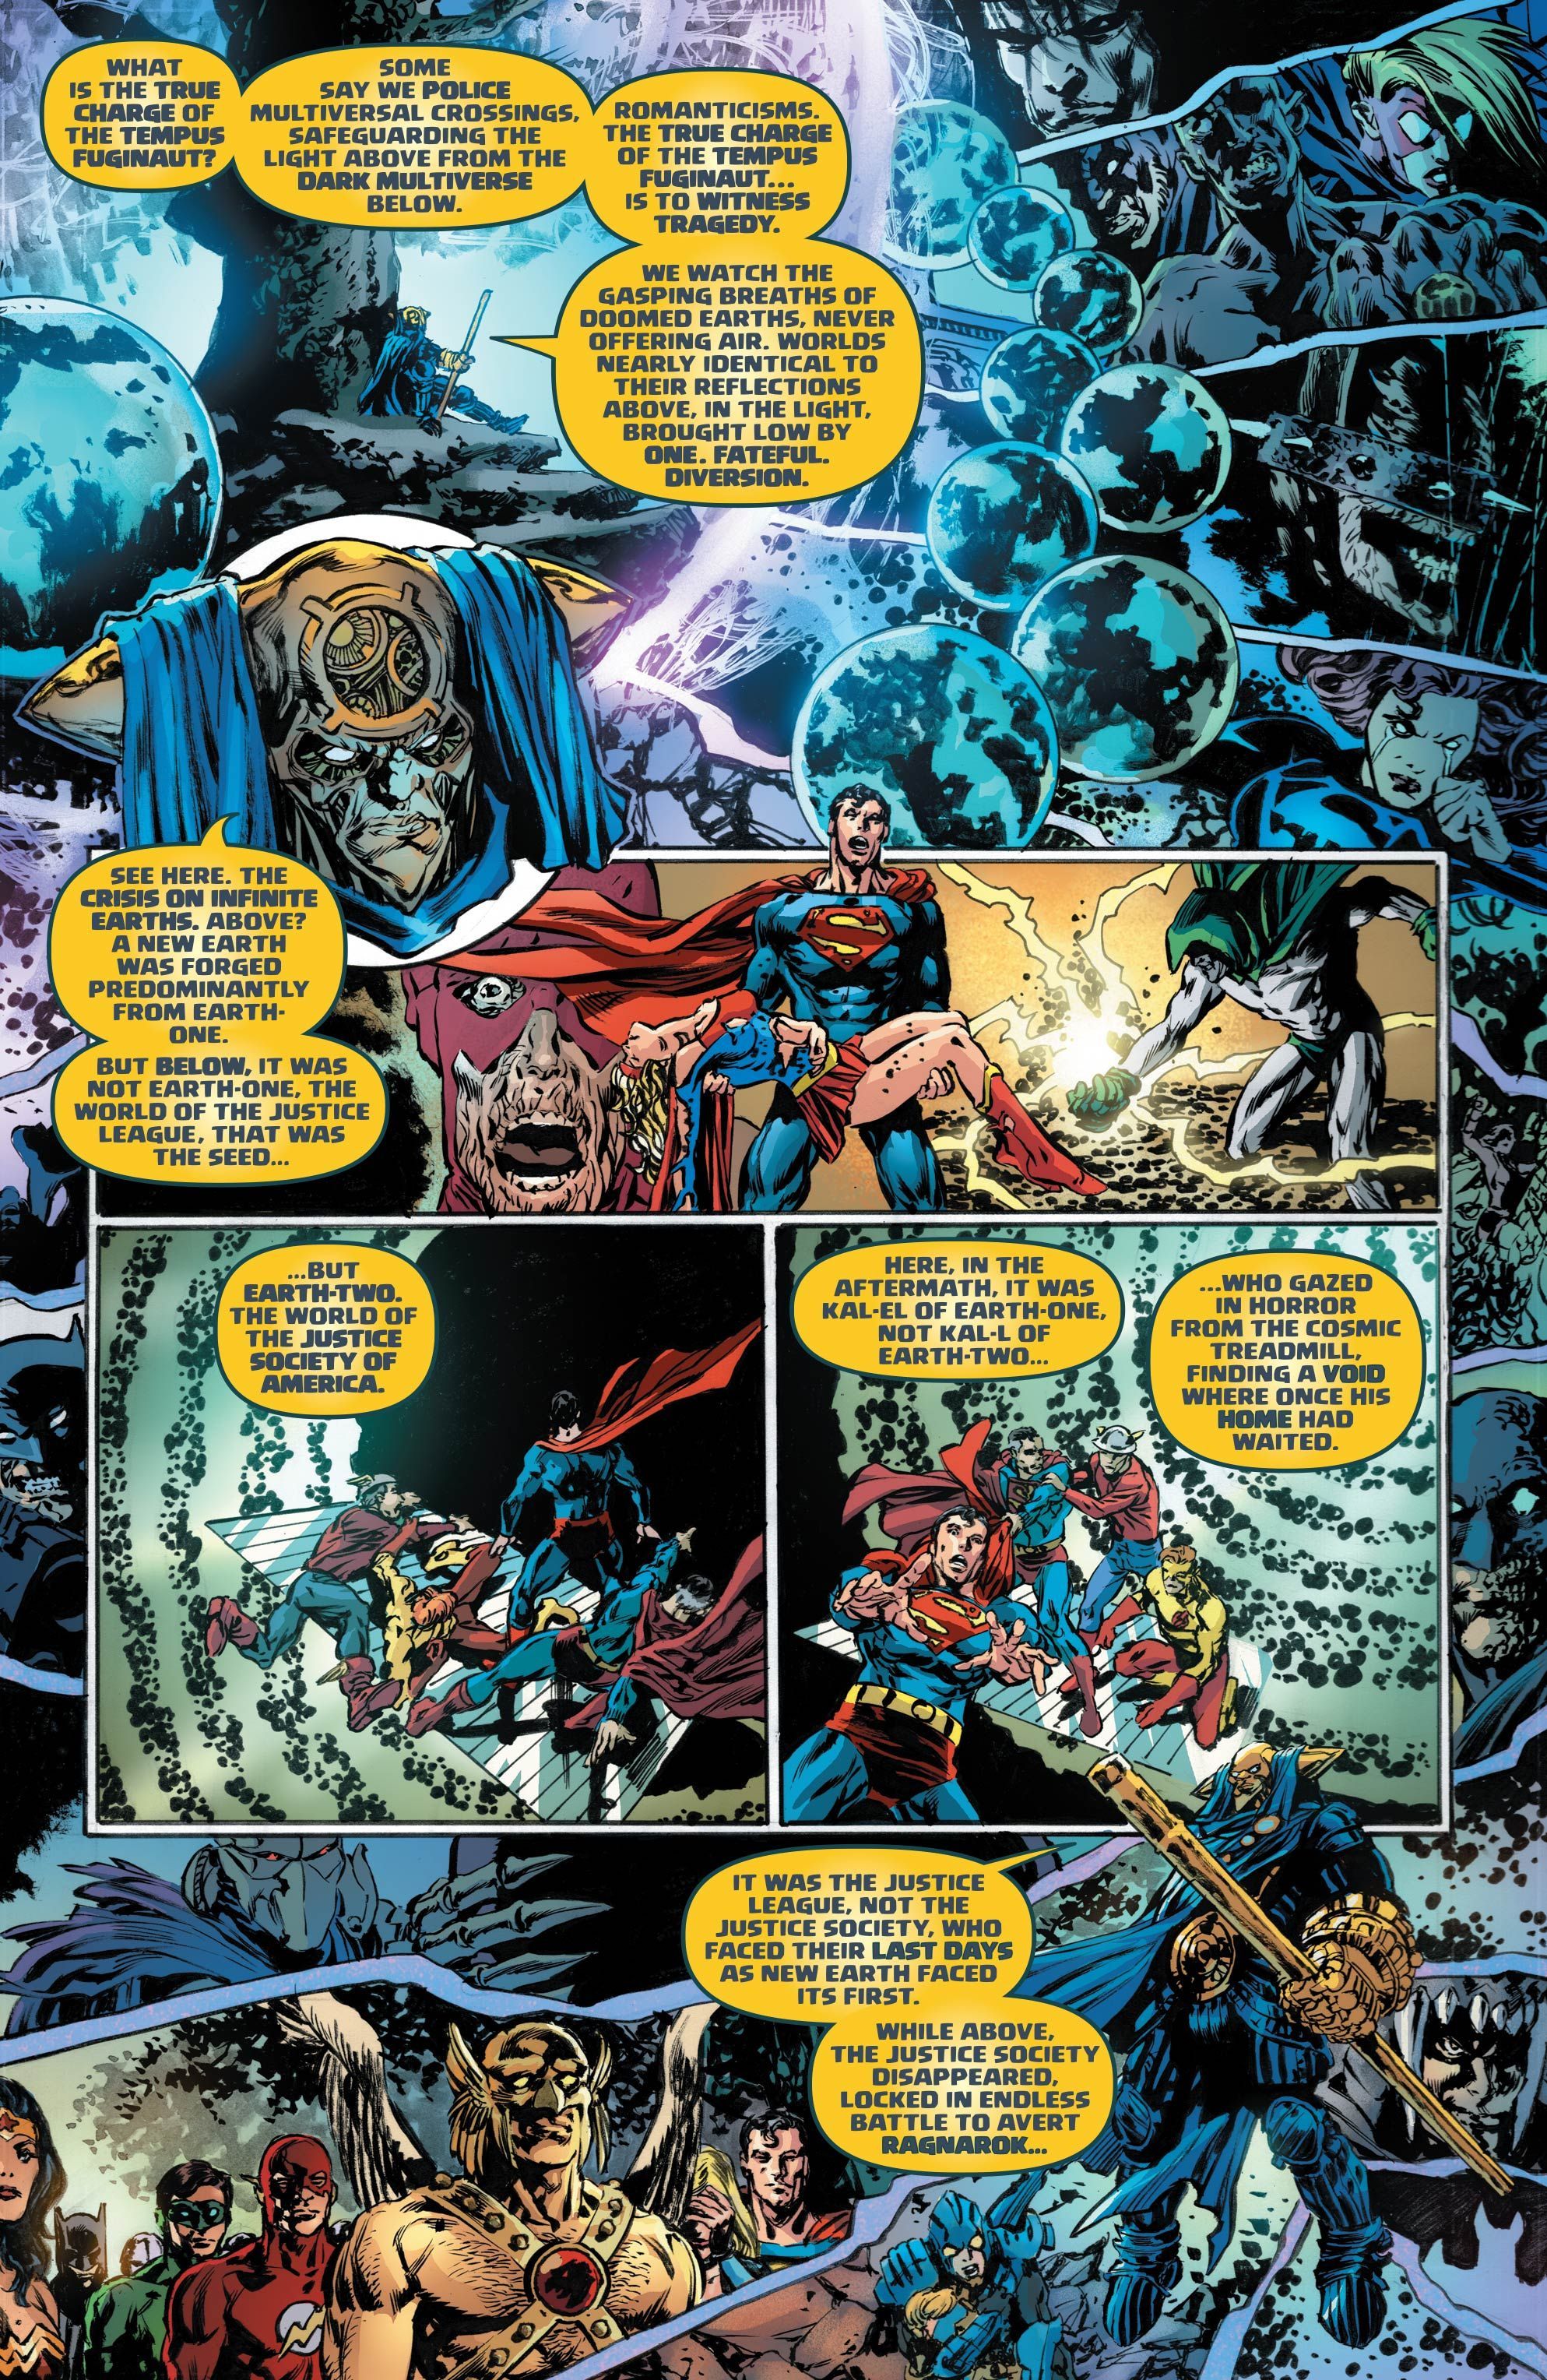 Tales from the Dark Multiverse Crisis on Infinite Earths #1